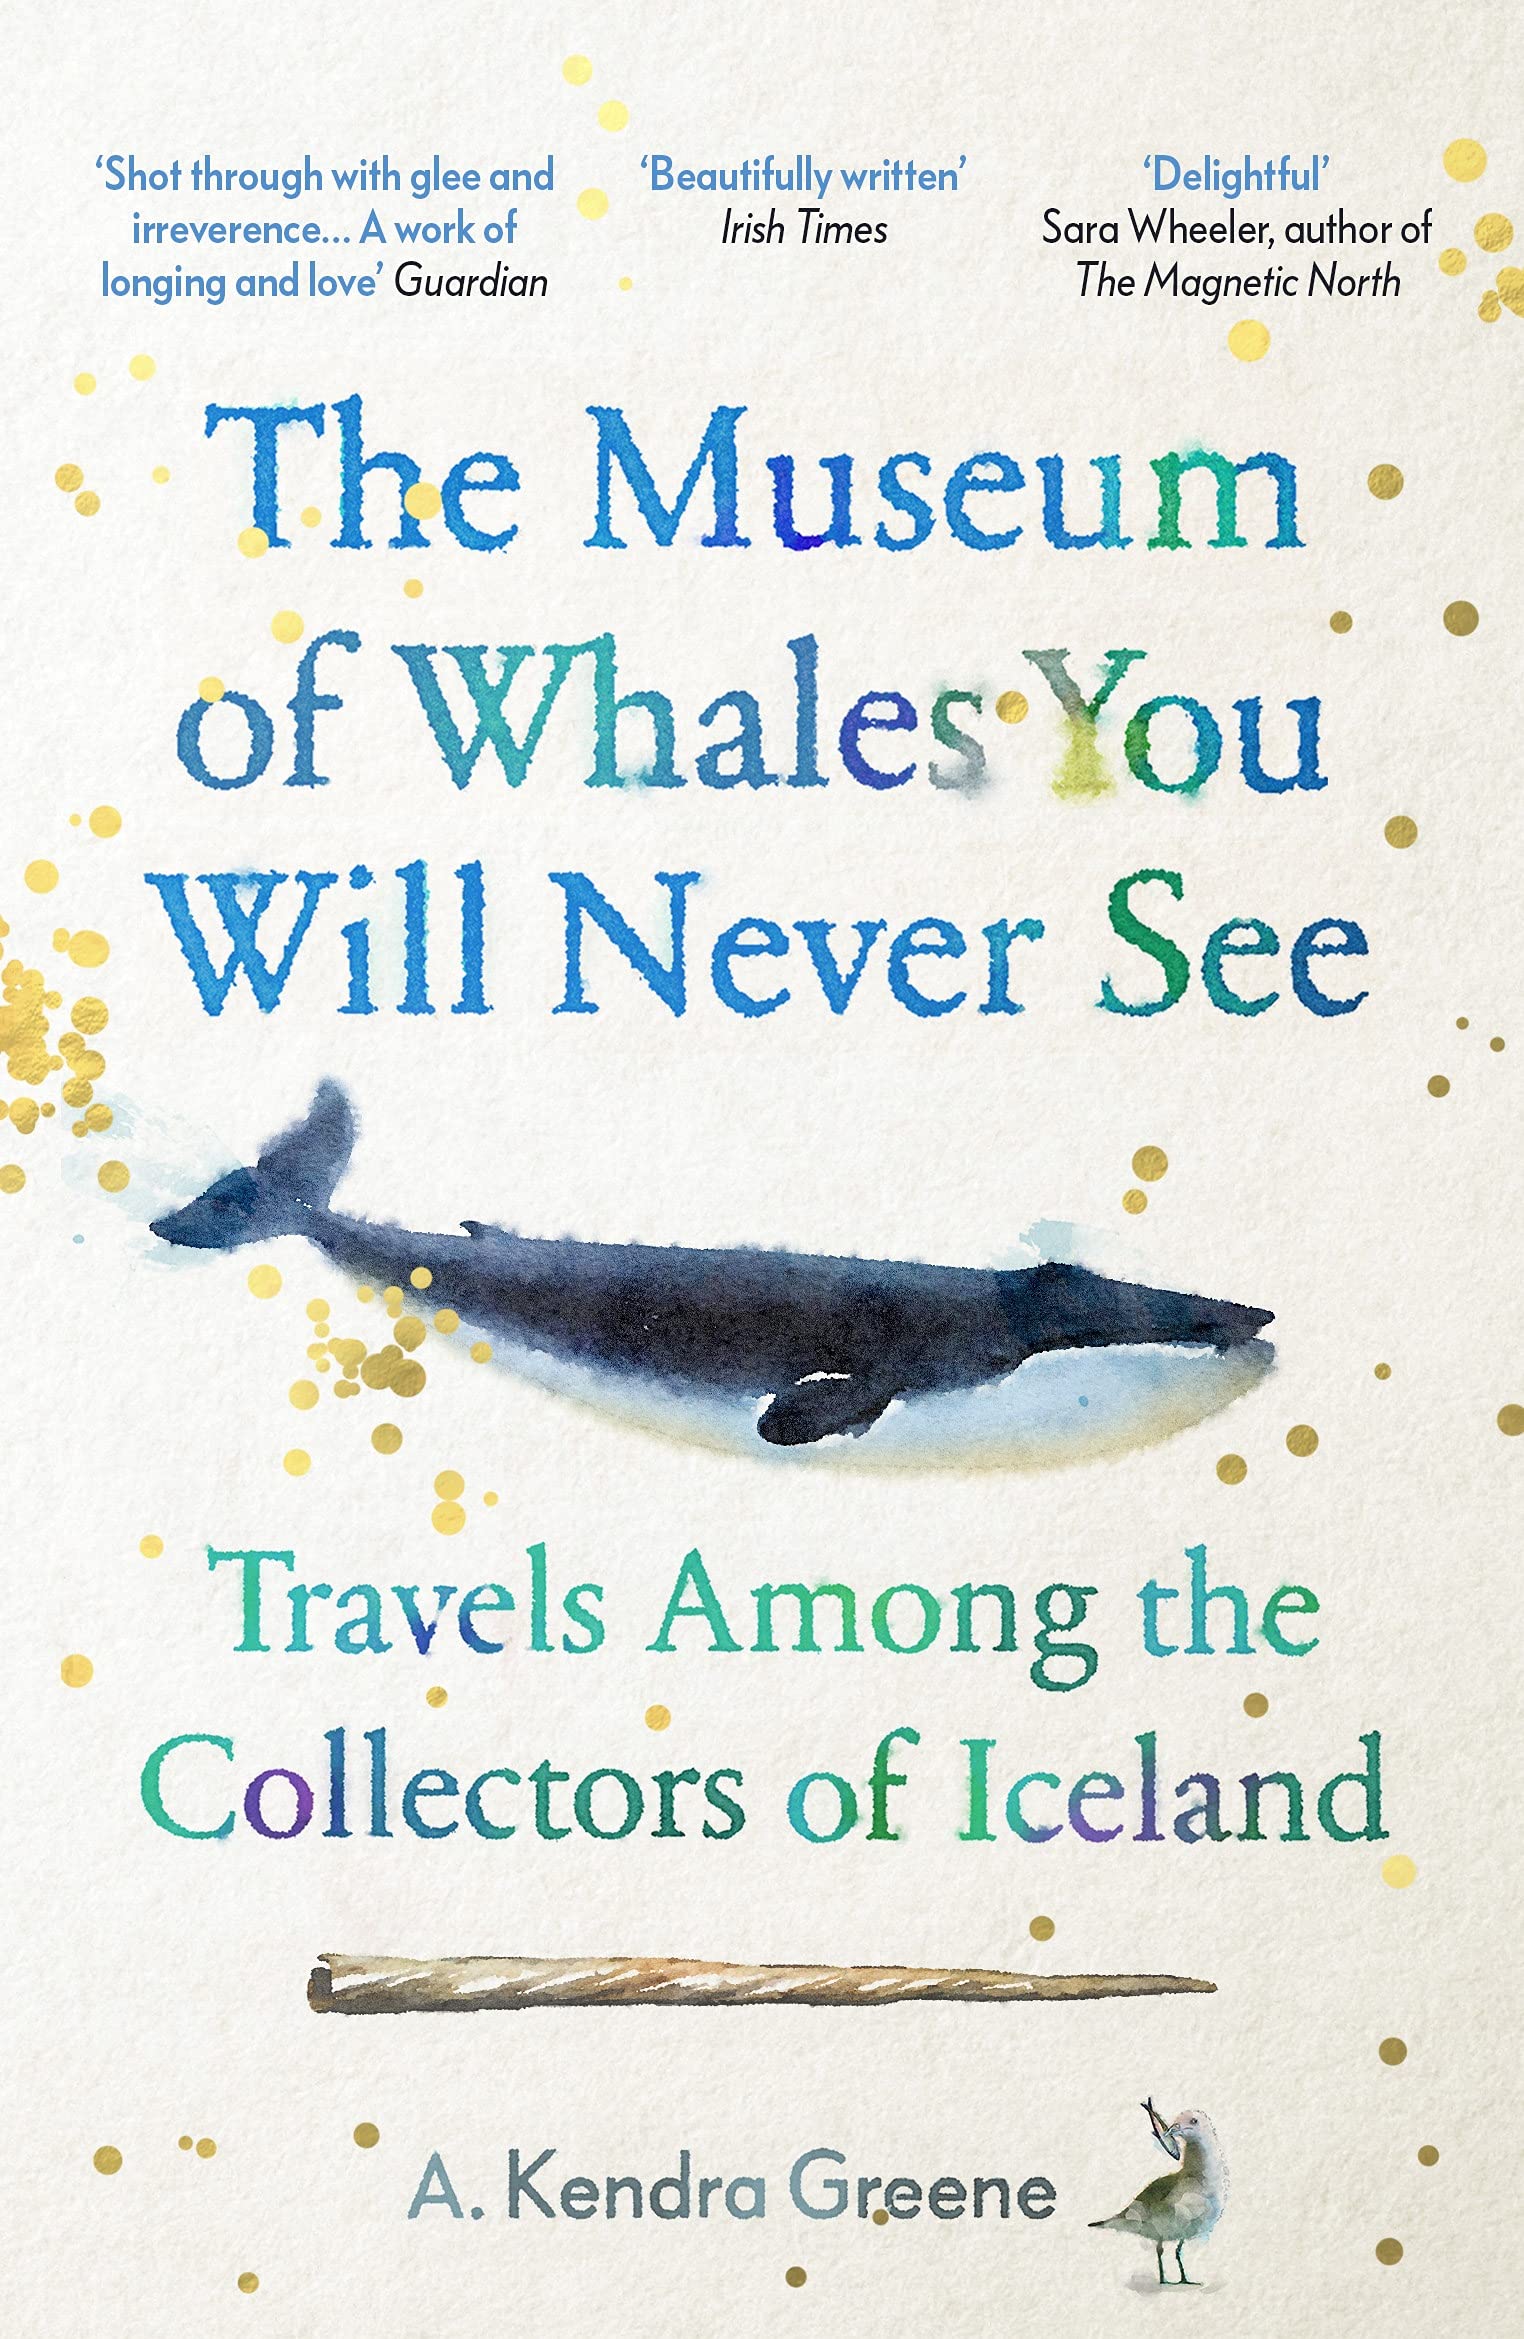 The Museum of Whales You Will Never See: Travels Among the Collectors of Iceland